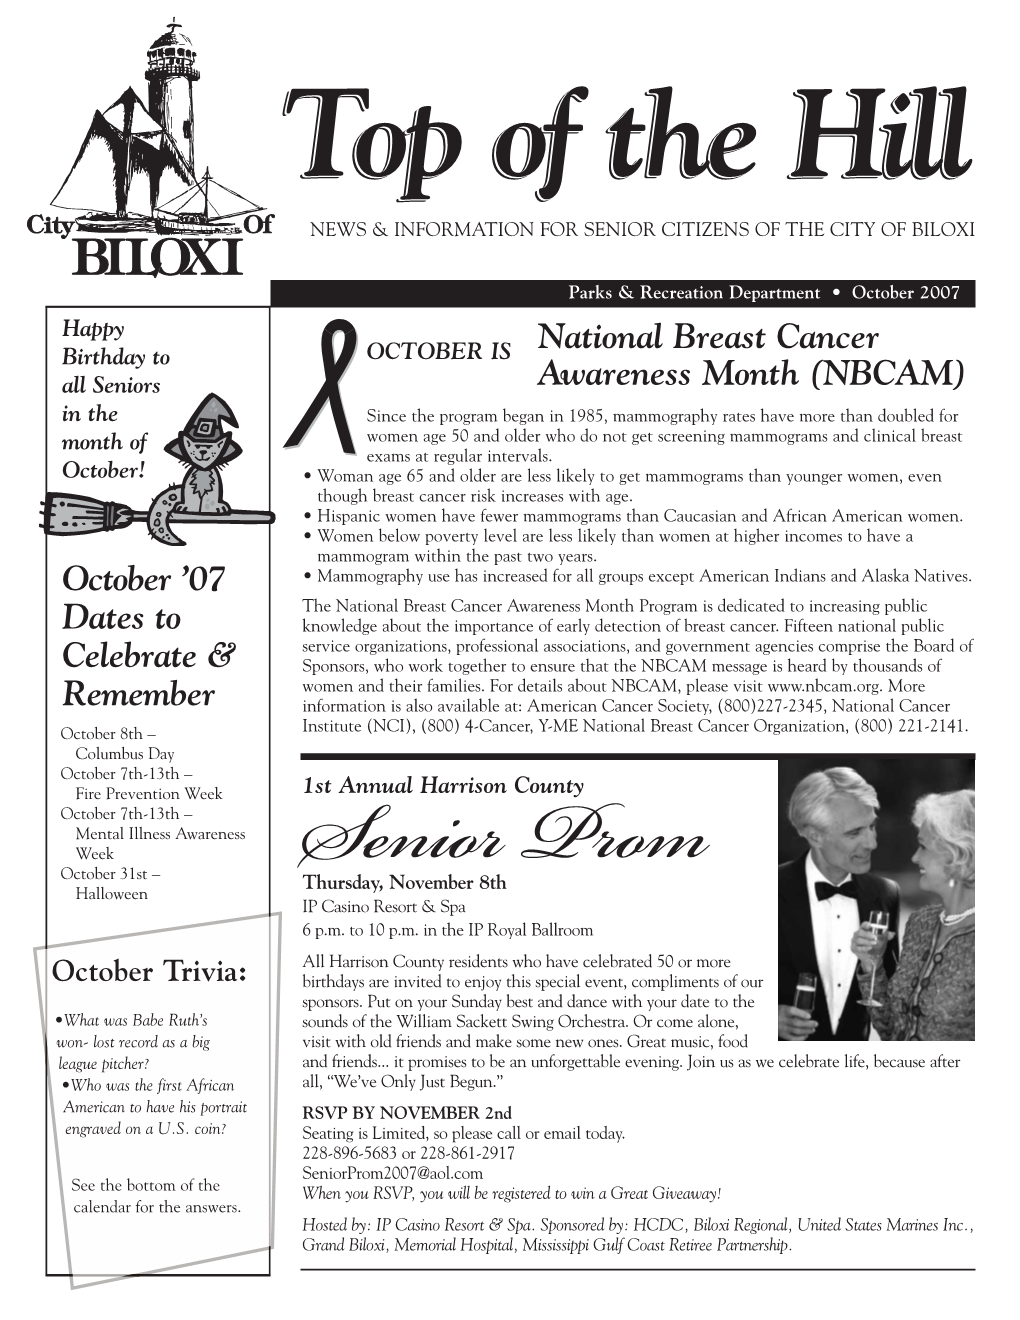 October '07 Dates to Celebrate & Remember National Breast Cancer Awareness Month (NBCAM)